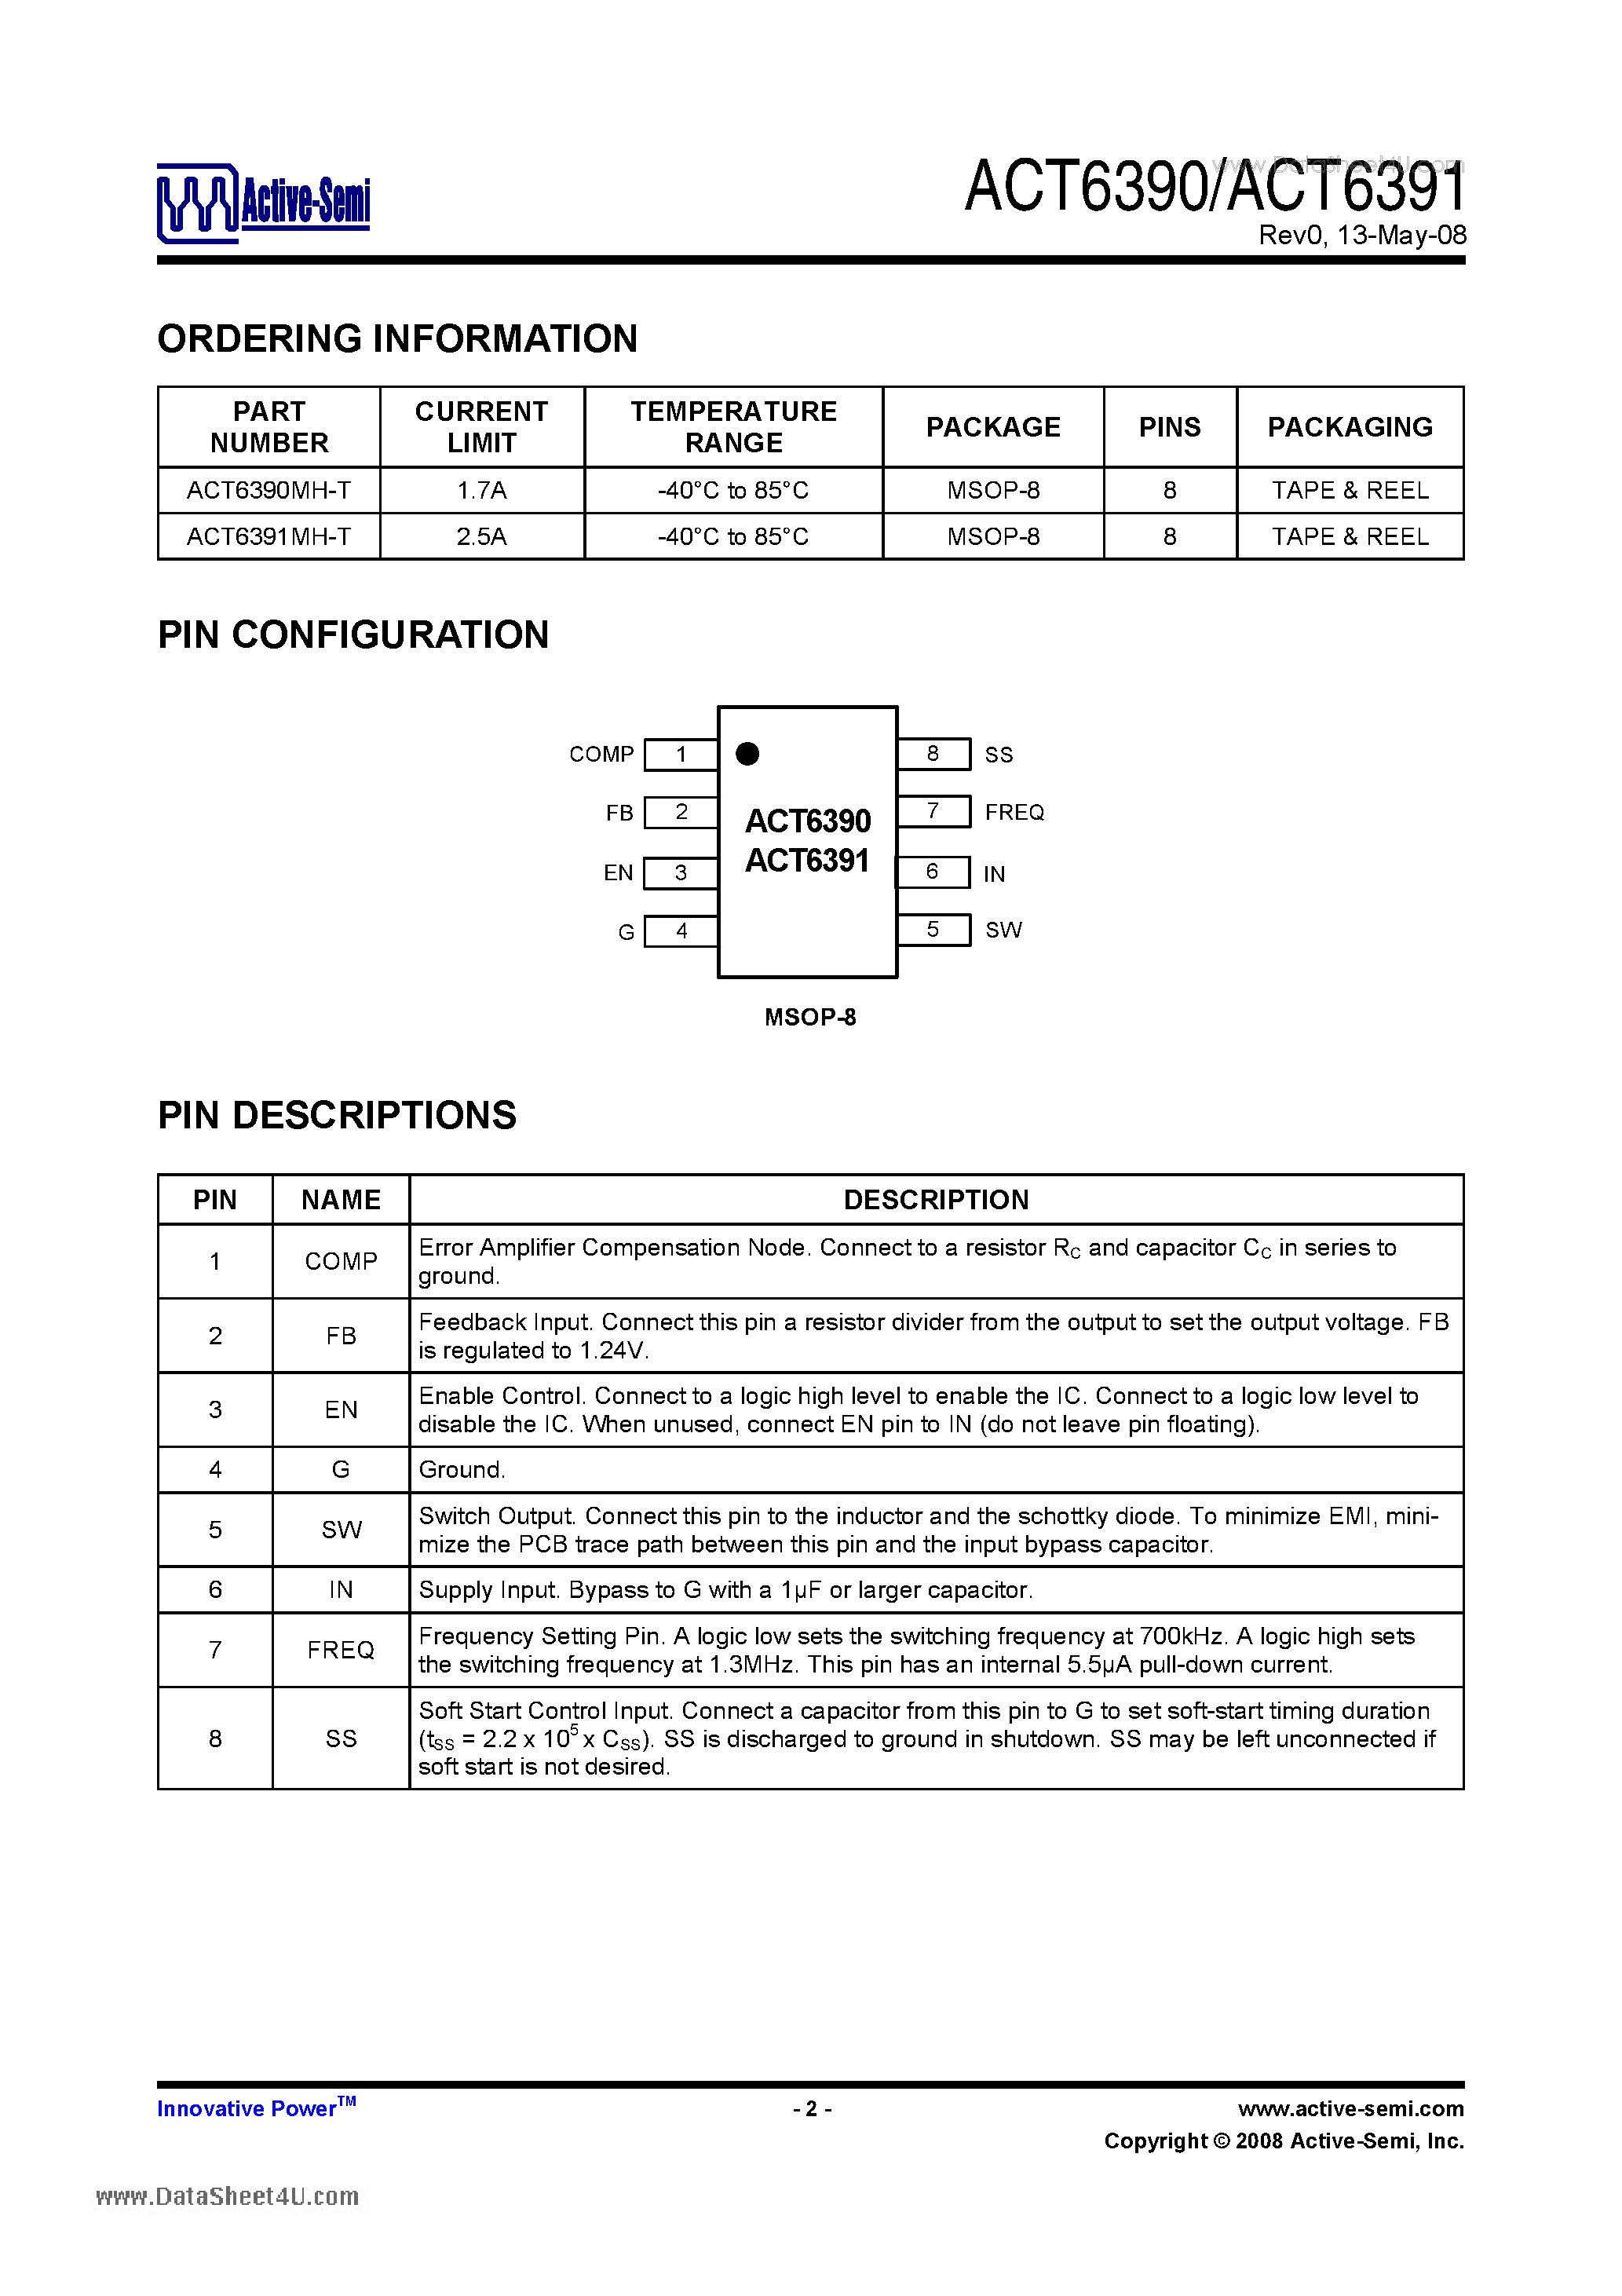 Datasheet ACT6390 - (ACT6390 / ACT6391) 1.7A/2.5A PWM Step-Up DC/DC Converters page 2